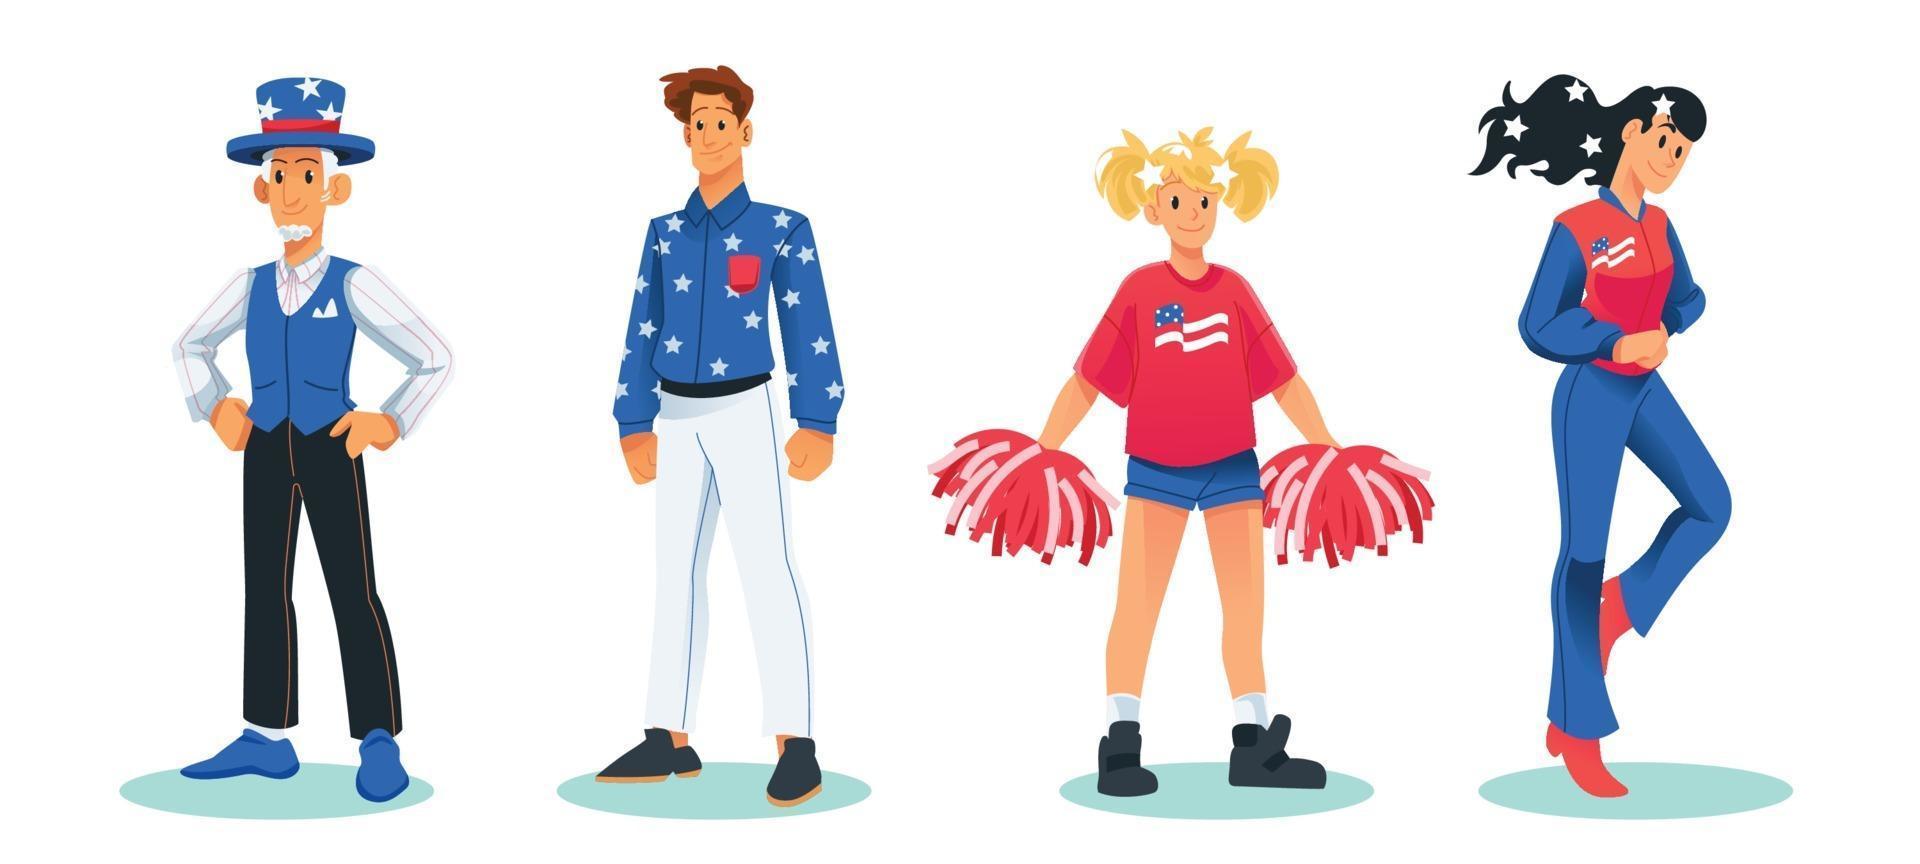 4th of July Character Collection vector